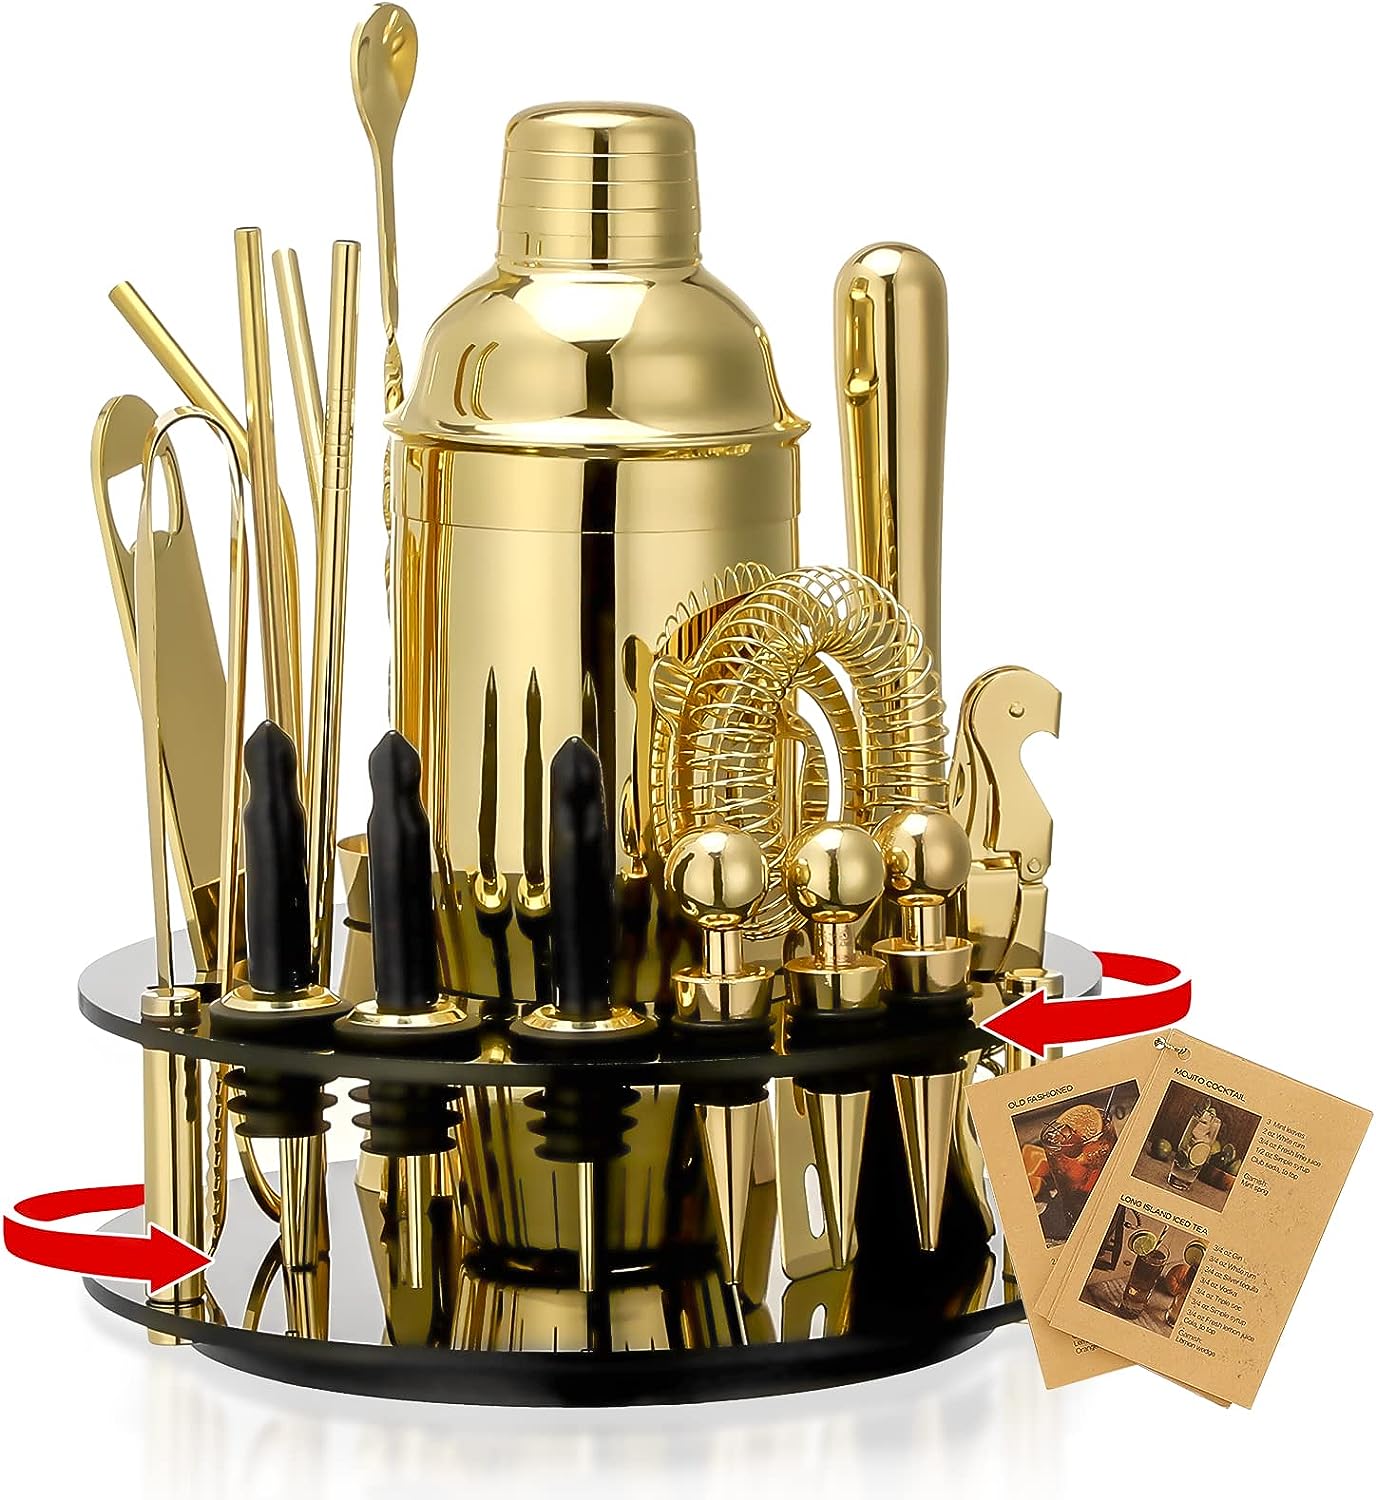 Gold kitchen collection